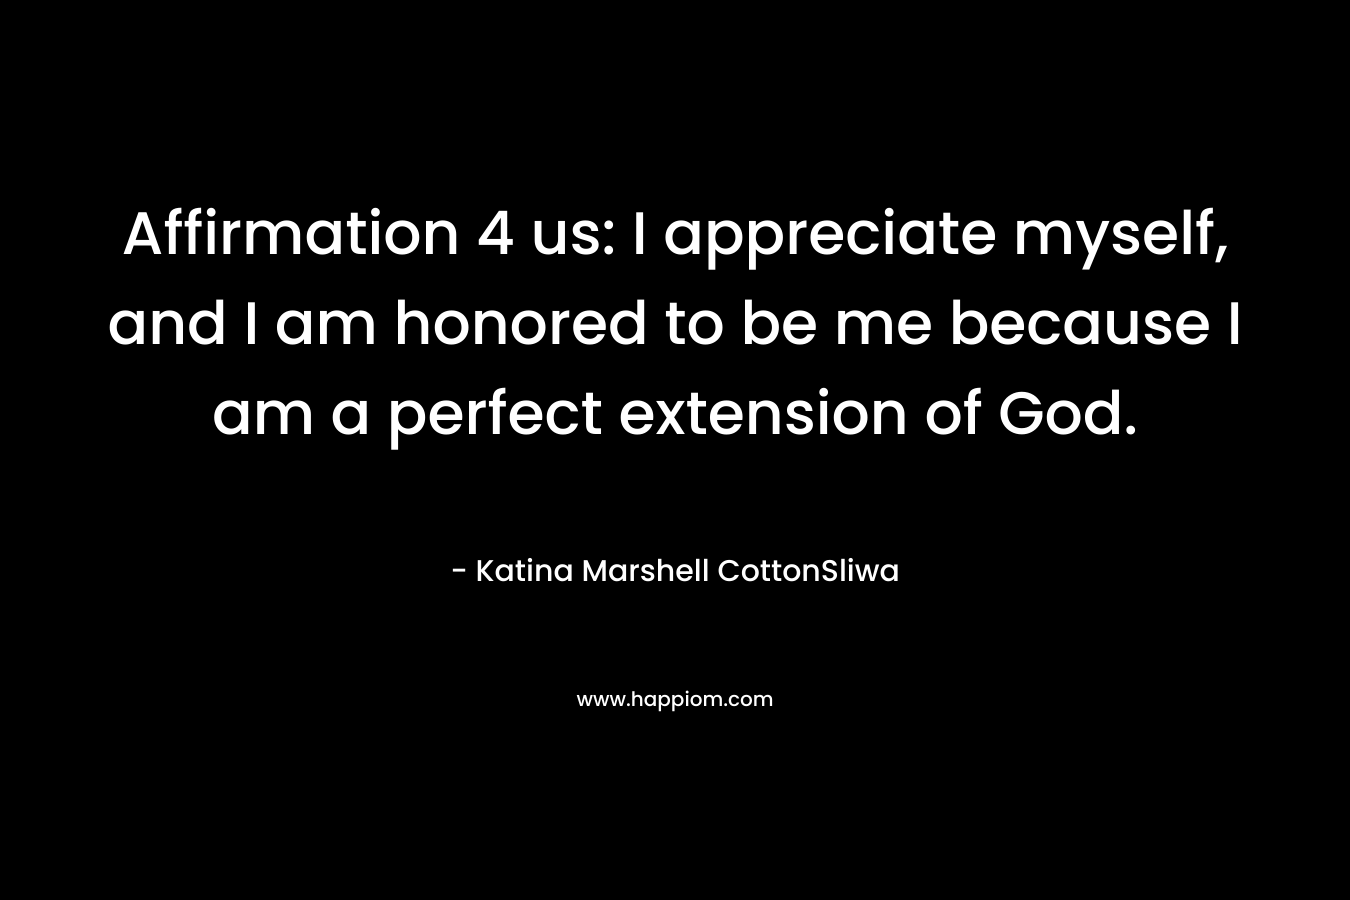 Affirmation 4 us: I appreciate myself, and I am honored to be me because I am a perfect extension of God. – Katina Marshell CottonSliwa